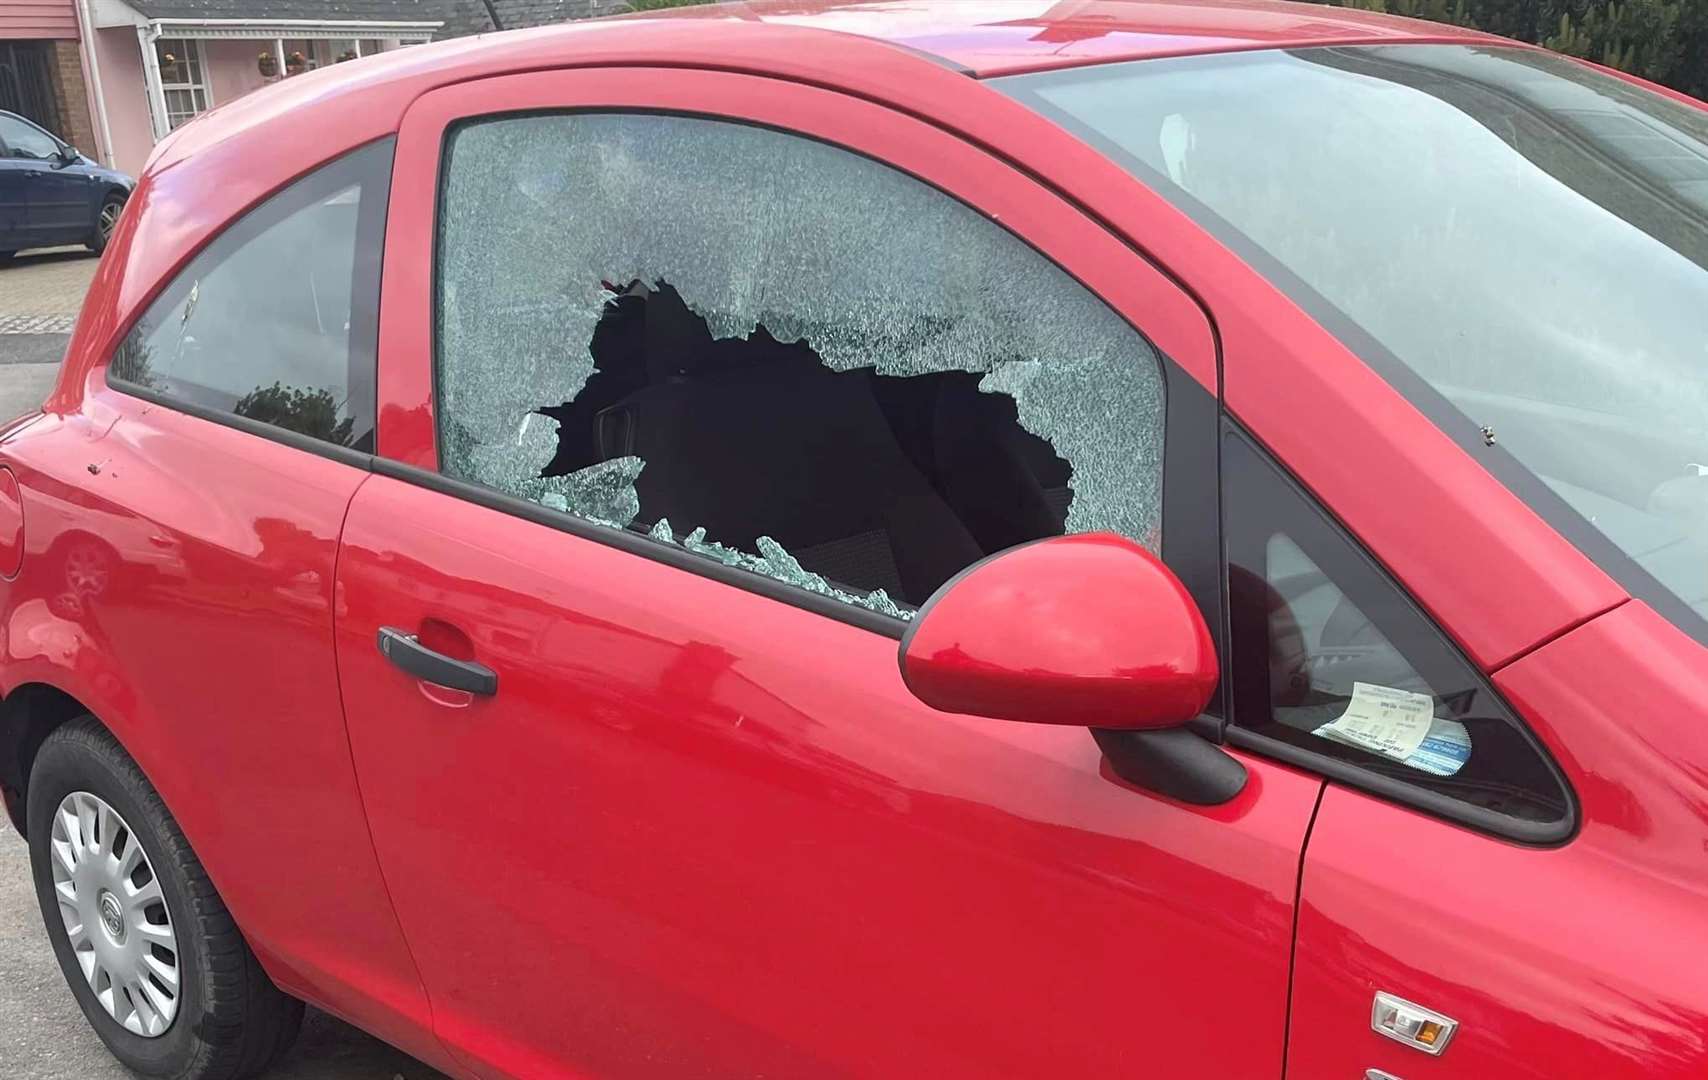 Sarah Mitchell's car window was smashed after being hit